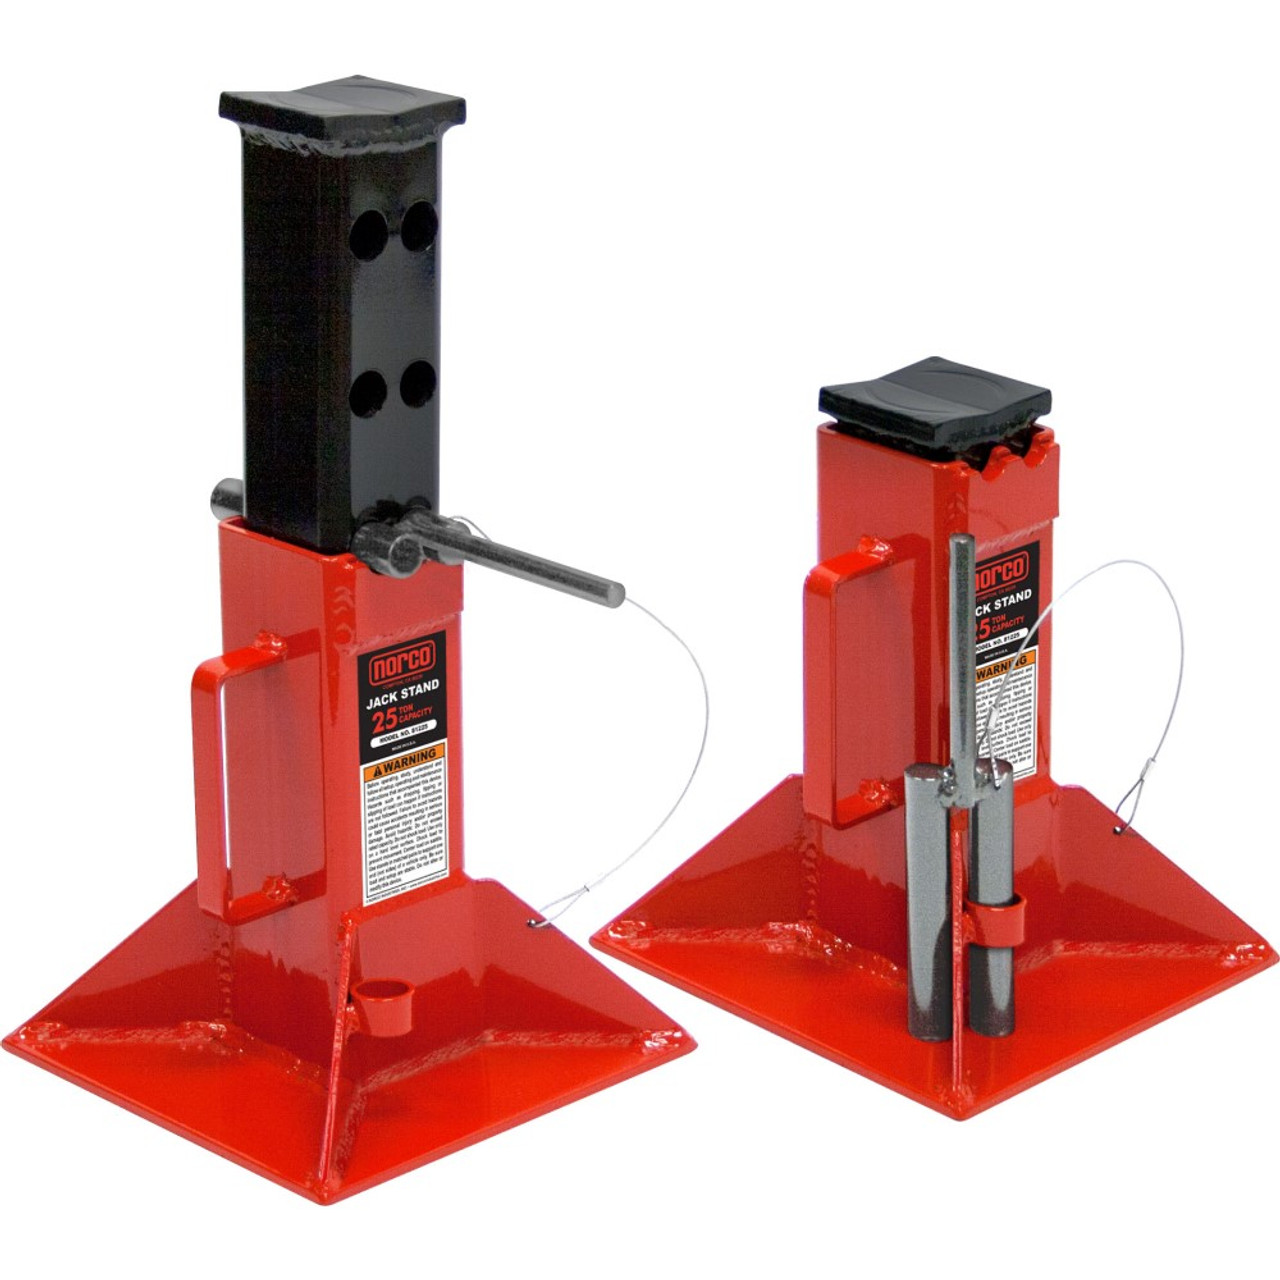 Norco 81225i: 25 Ton Capacity Jack Stands â€“ Imported